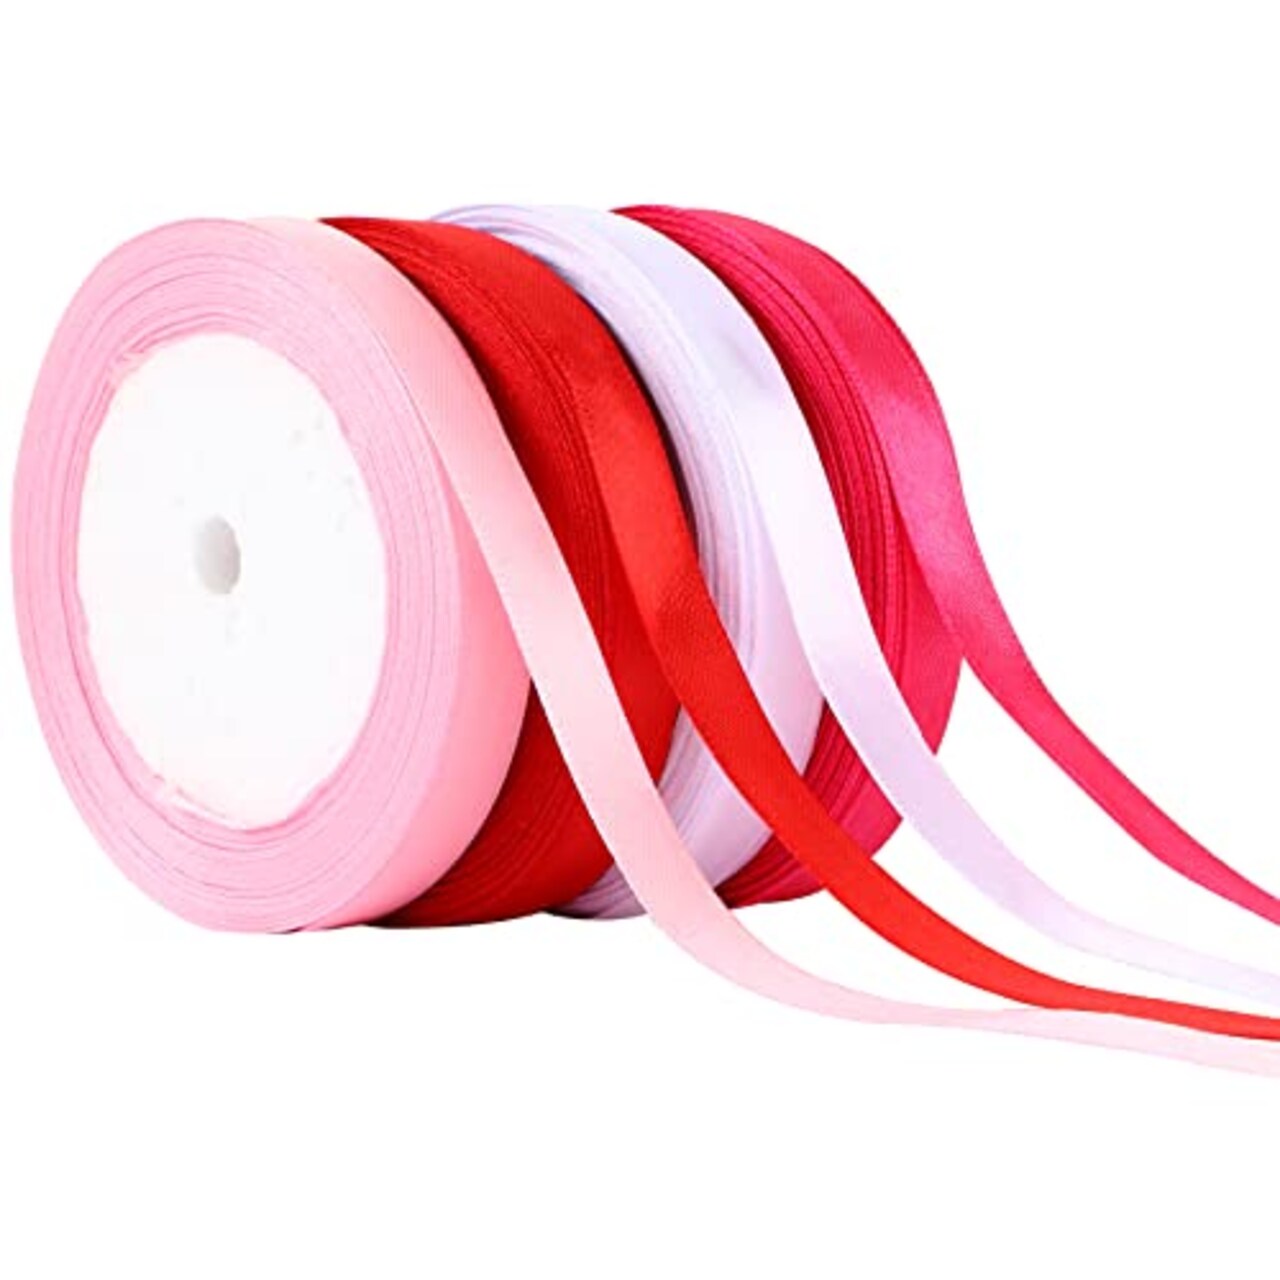 4 Rolls 100 Yards Valentine's Day Ribbons for Gift Wrapping, 10mm Wide  Valentines Satin Ribbon for Valentine's Day Wedding Holiday Craft Projects